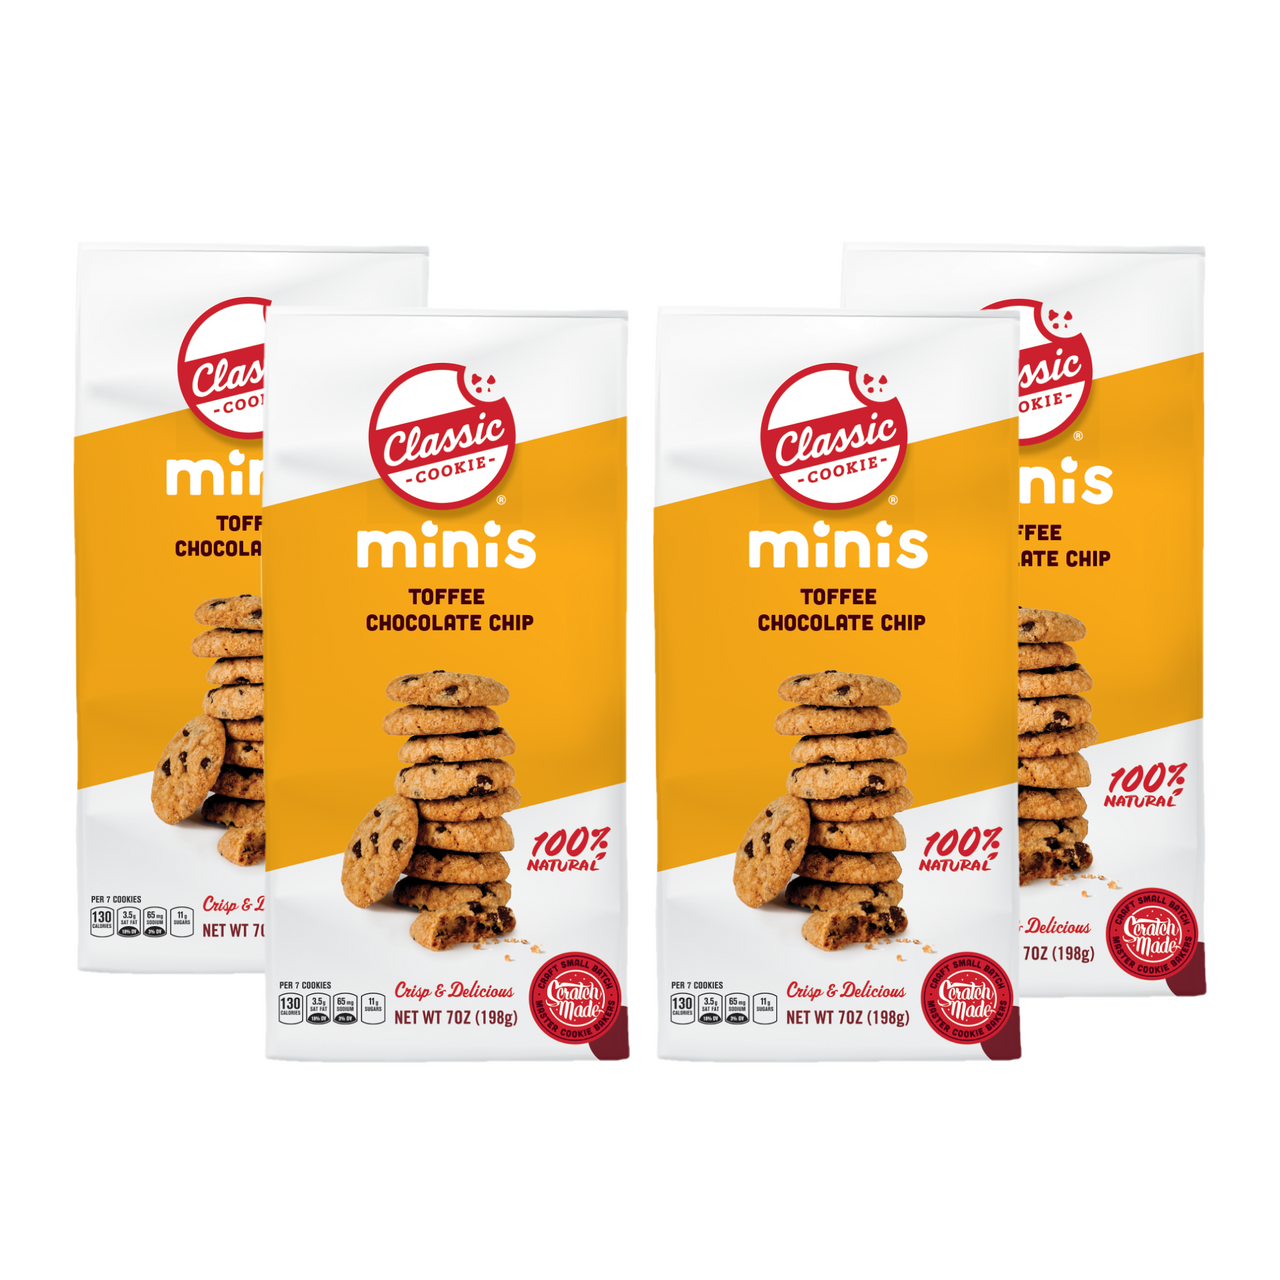 Classic Cookie Minis Crispy Toffee Chocolate Chip Cookies made with Heath®'s Butter Toffee Candy